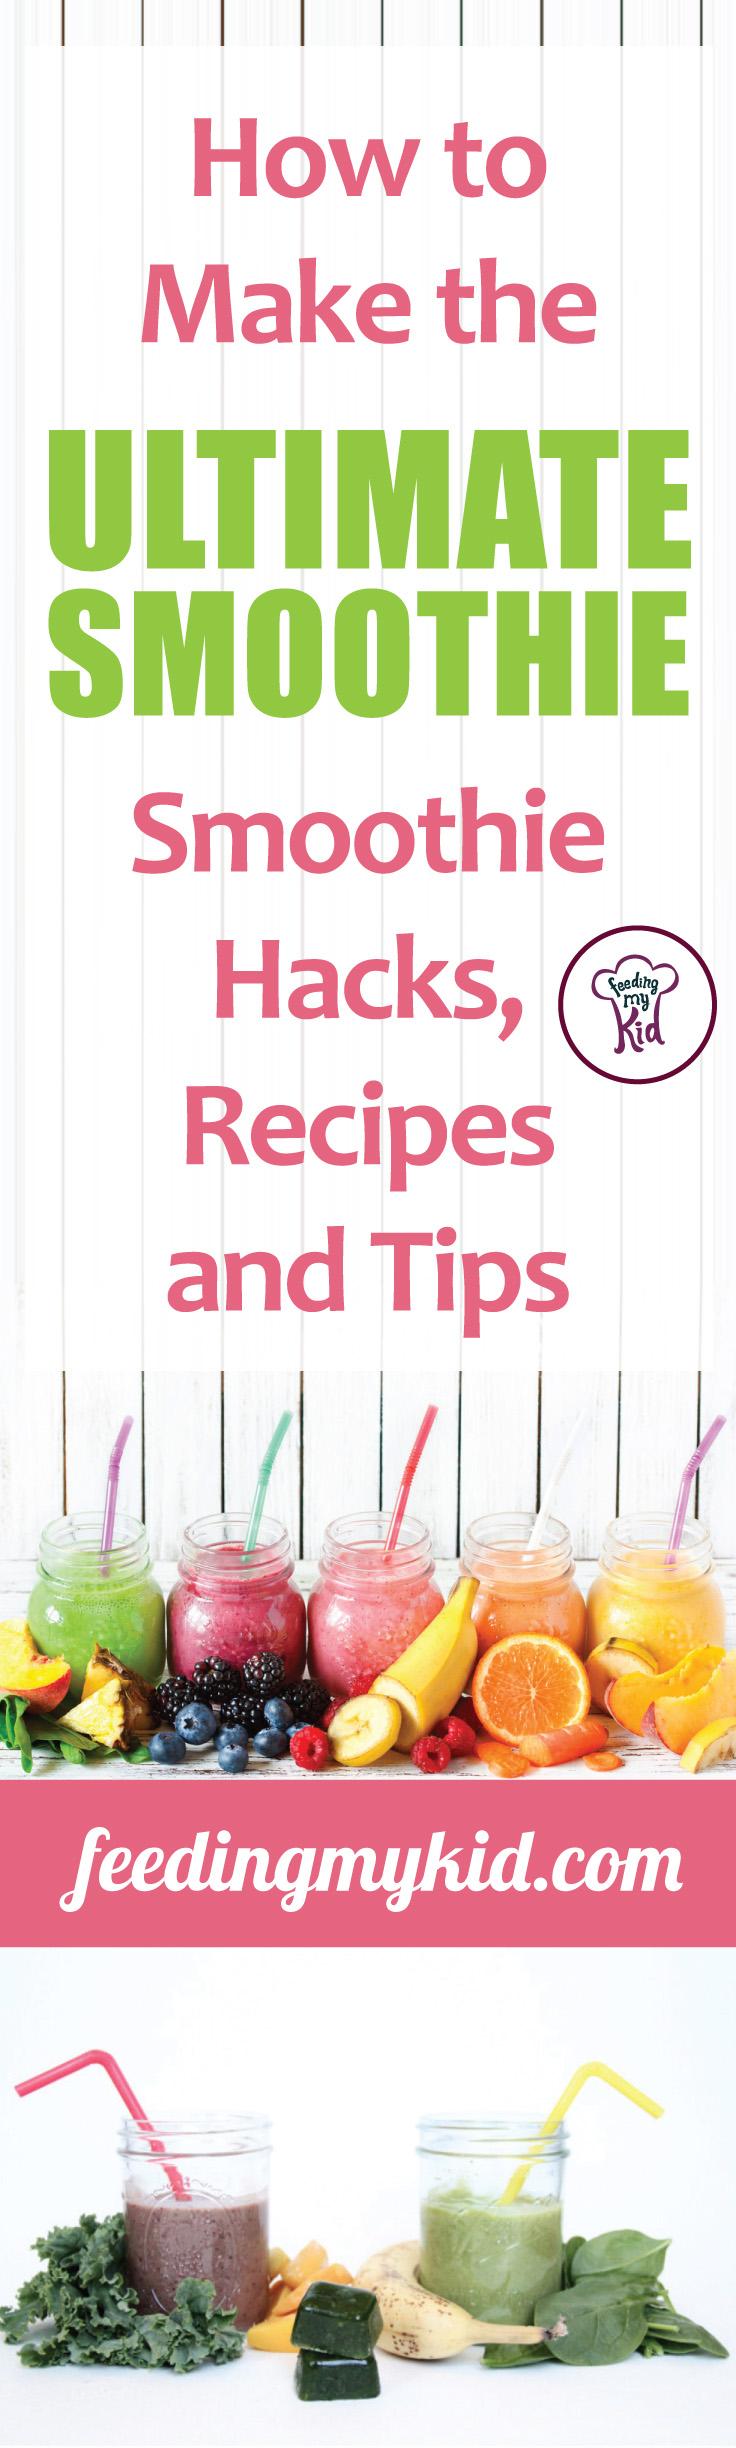 How to Make the Ultimate Smoothie. Smoothie Hacks, Recipe and Tips